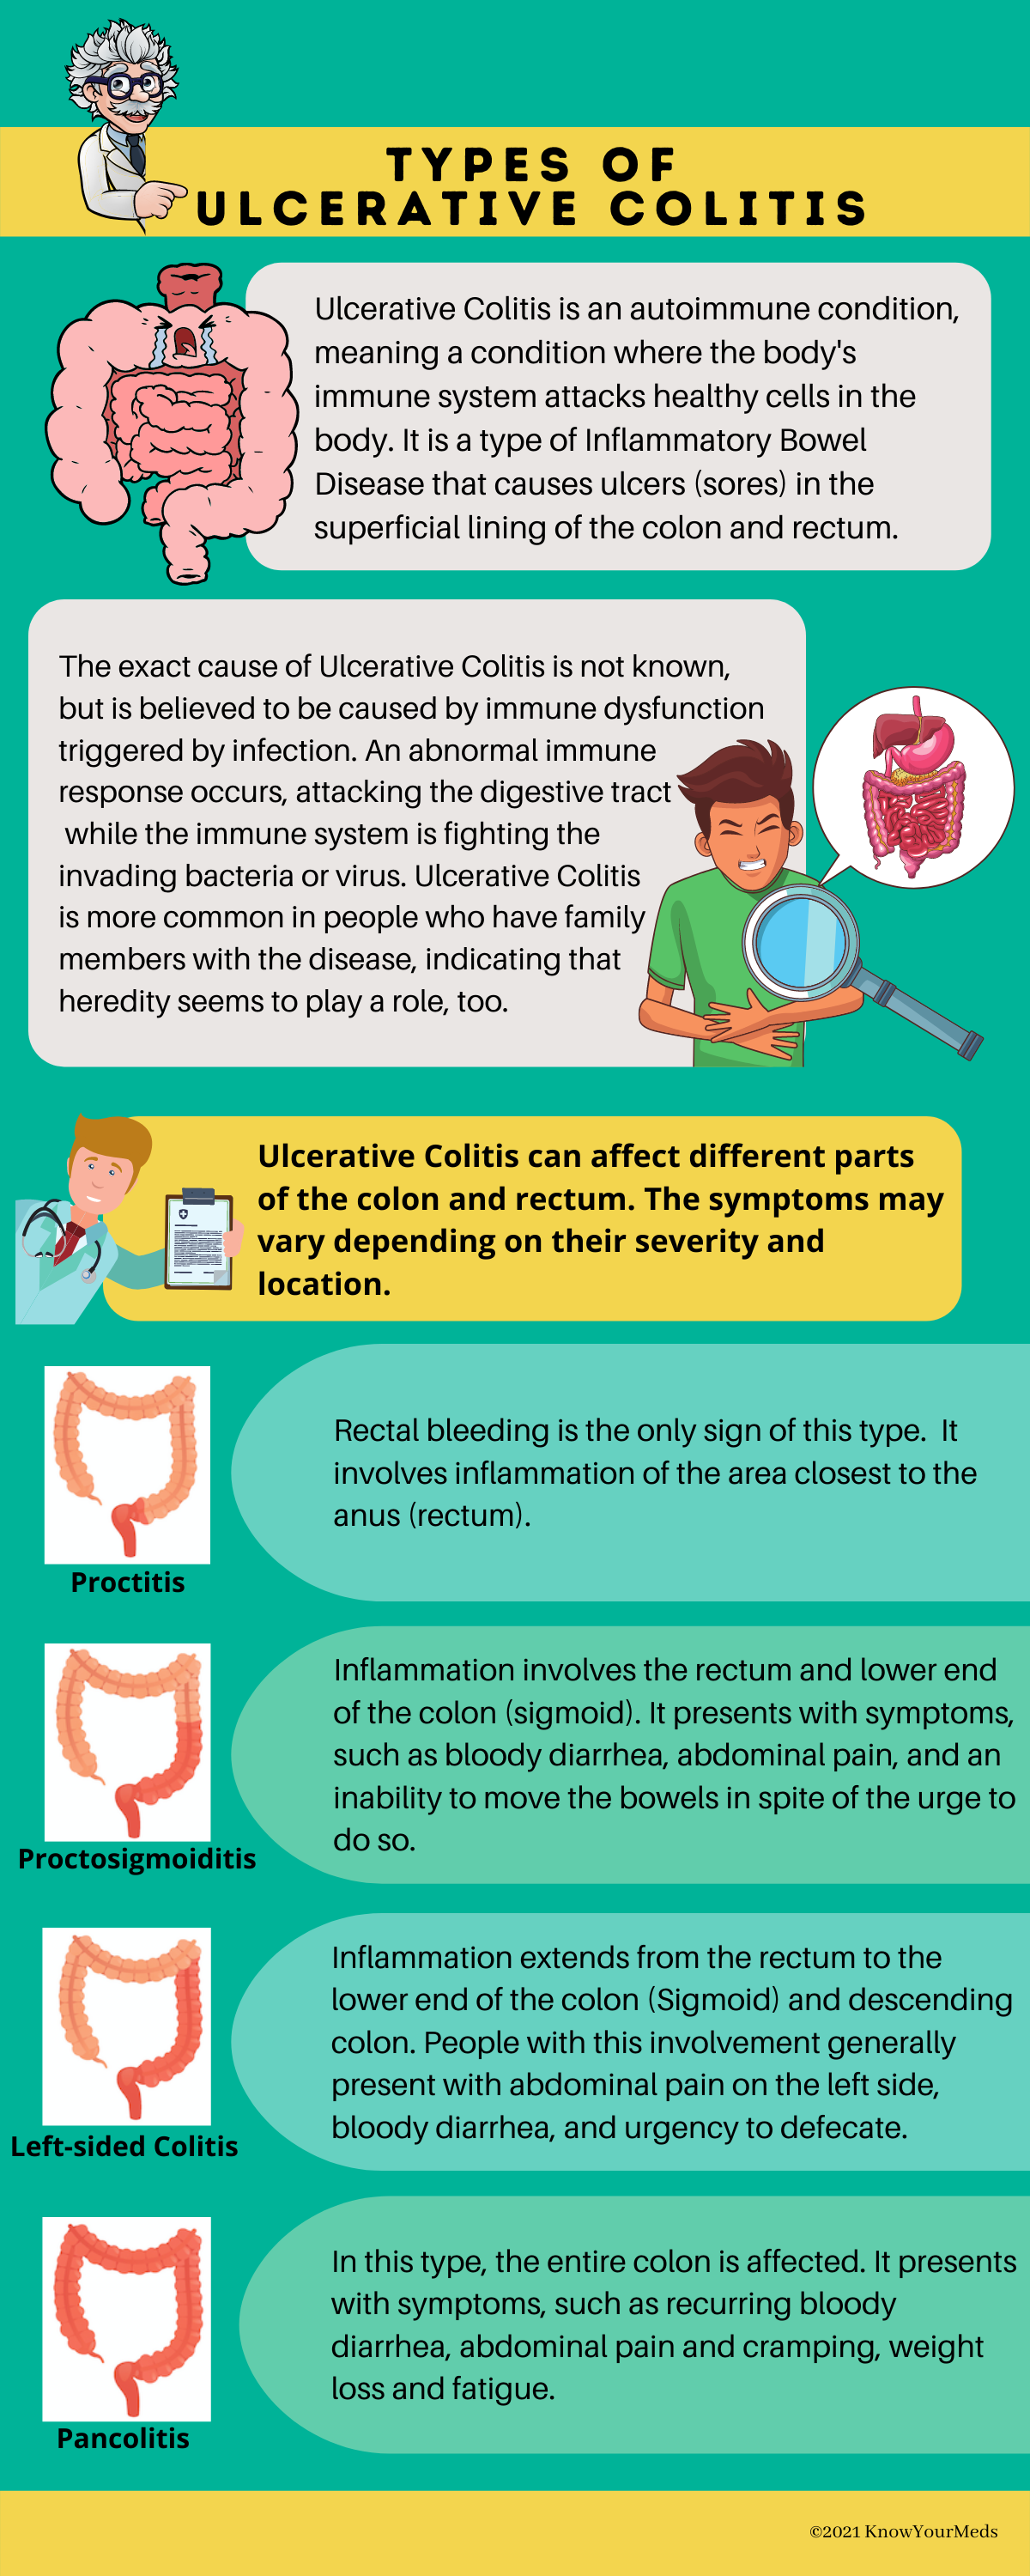 Types of ulcerative colitis